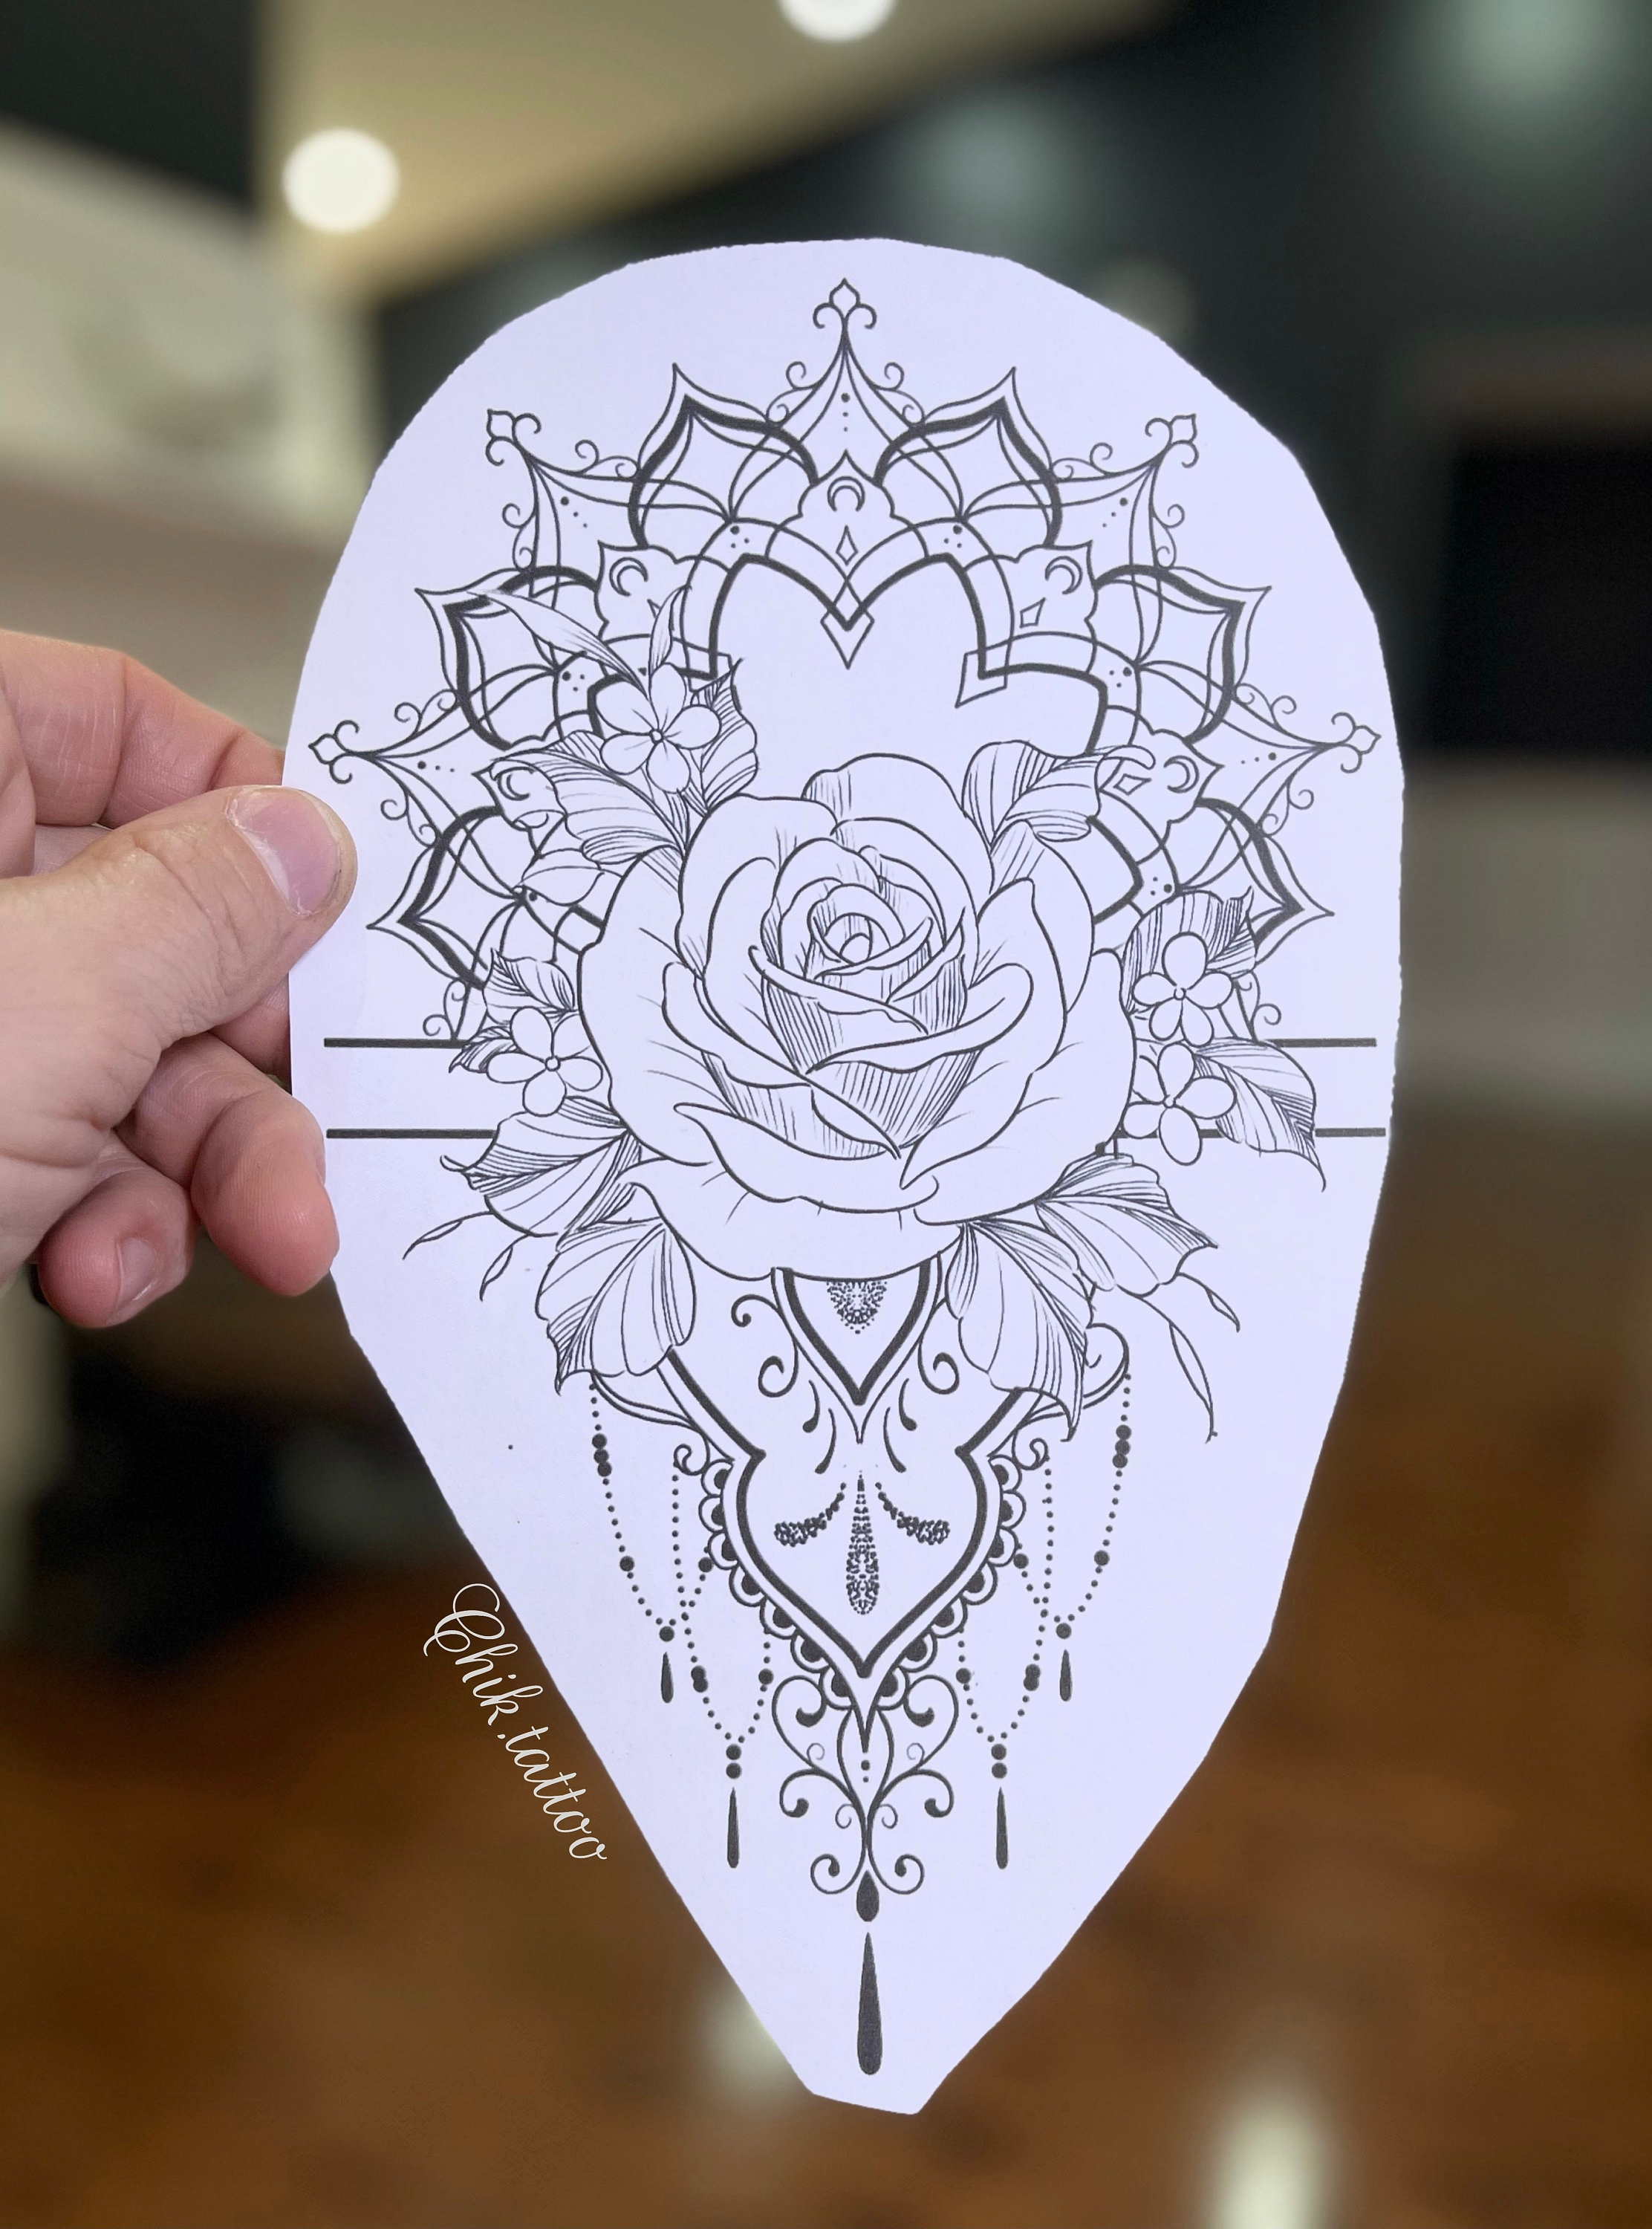 17 Mandala Tattoo Designs to Help Channel Your Inner Warrior Princess -  (Page 2)